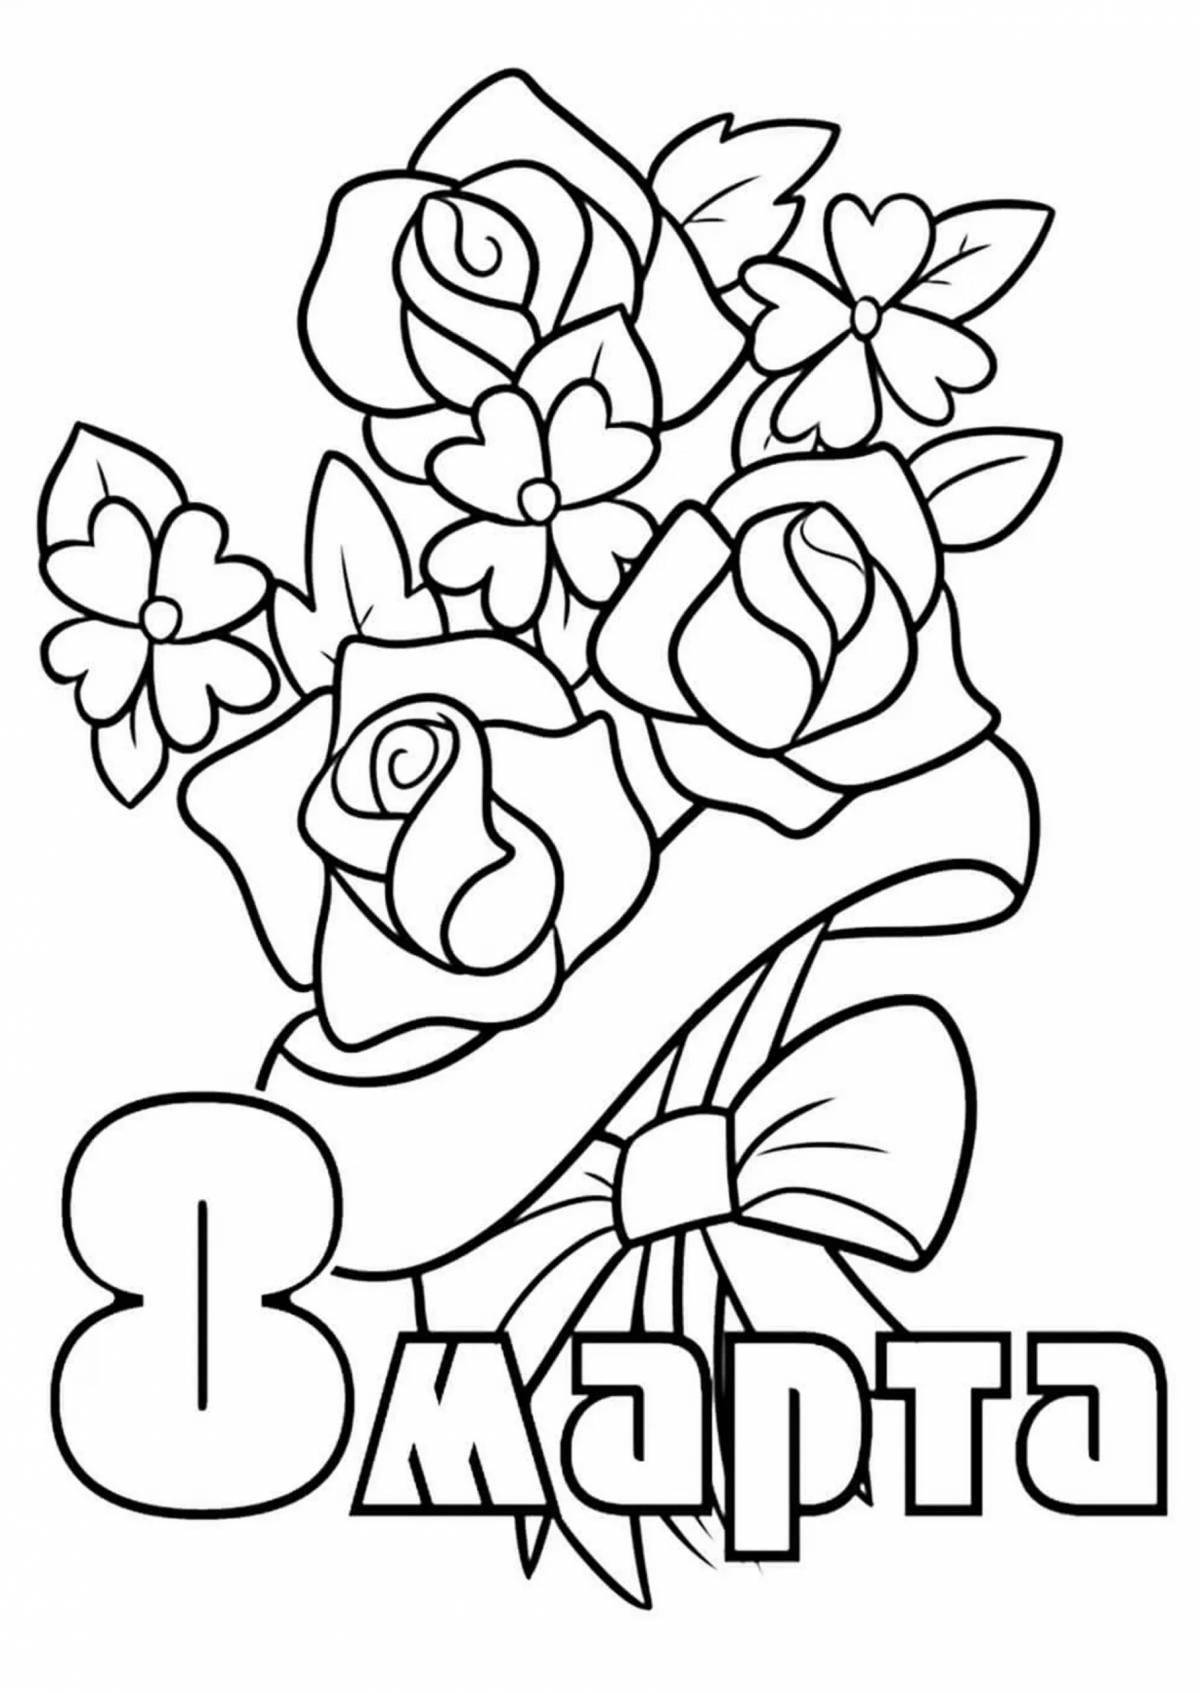 Merry March coloring page